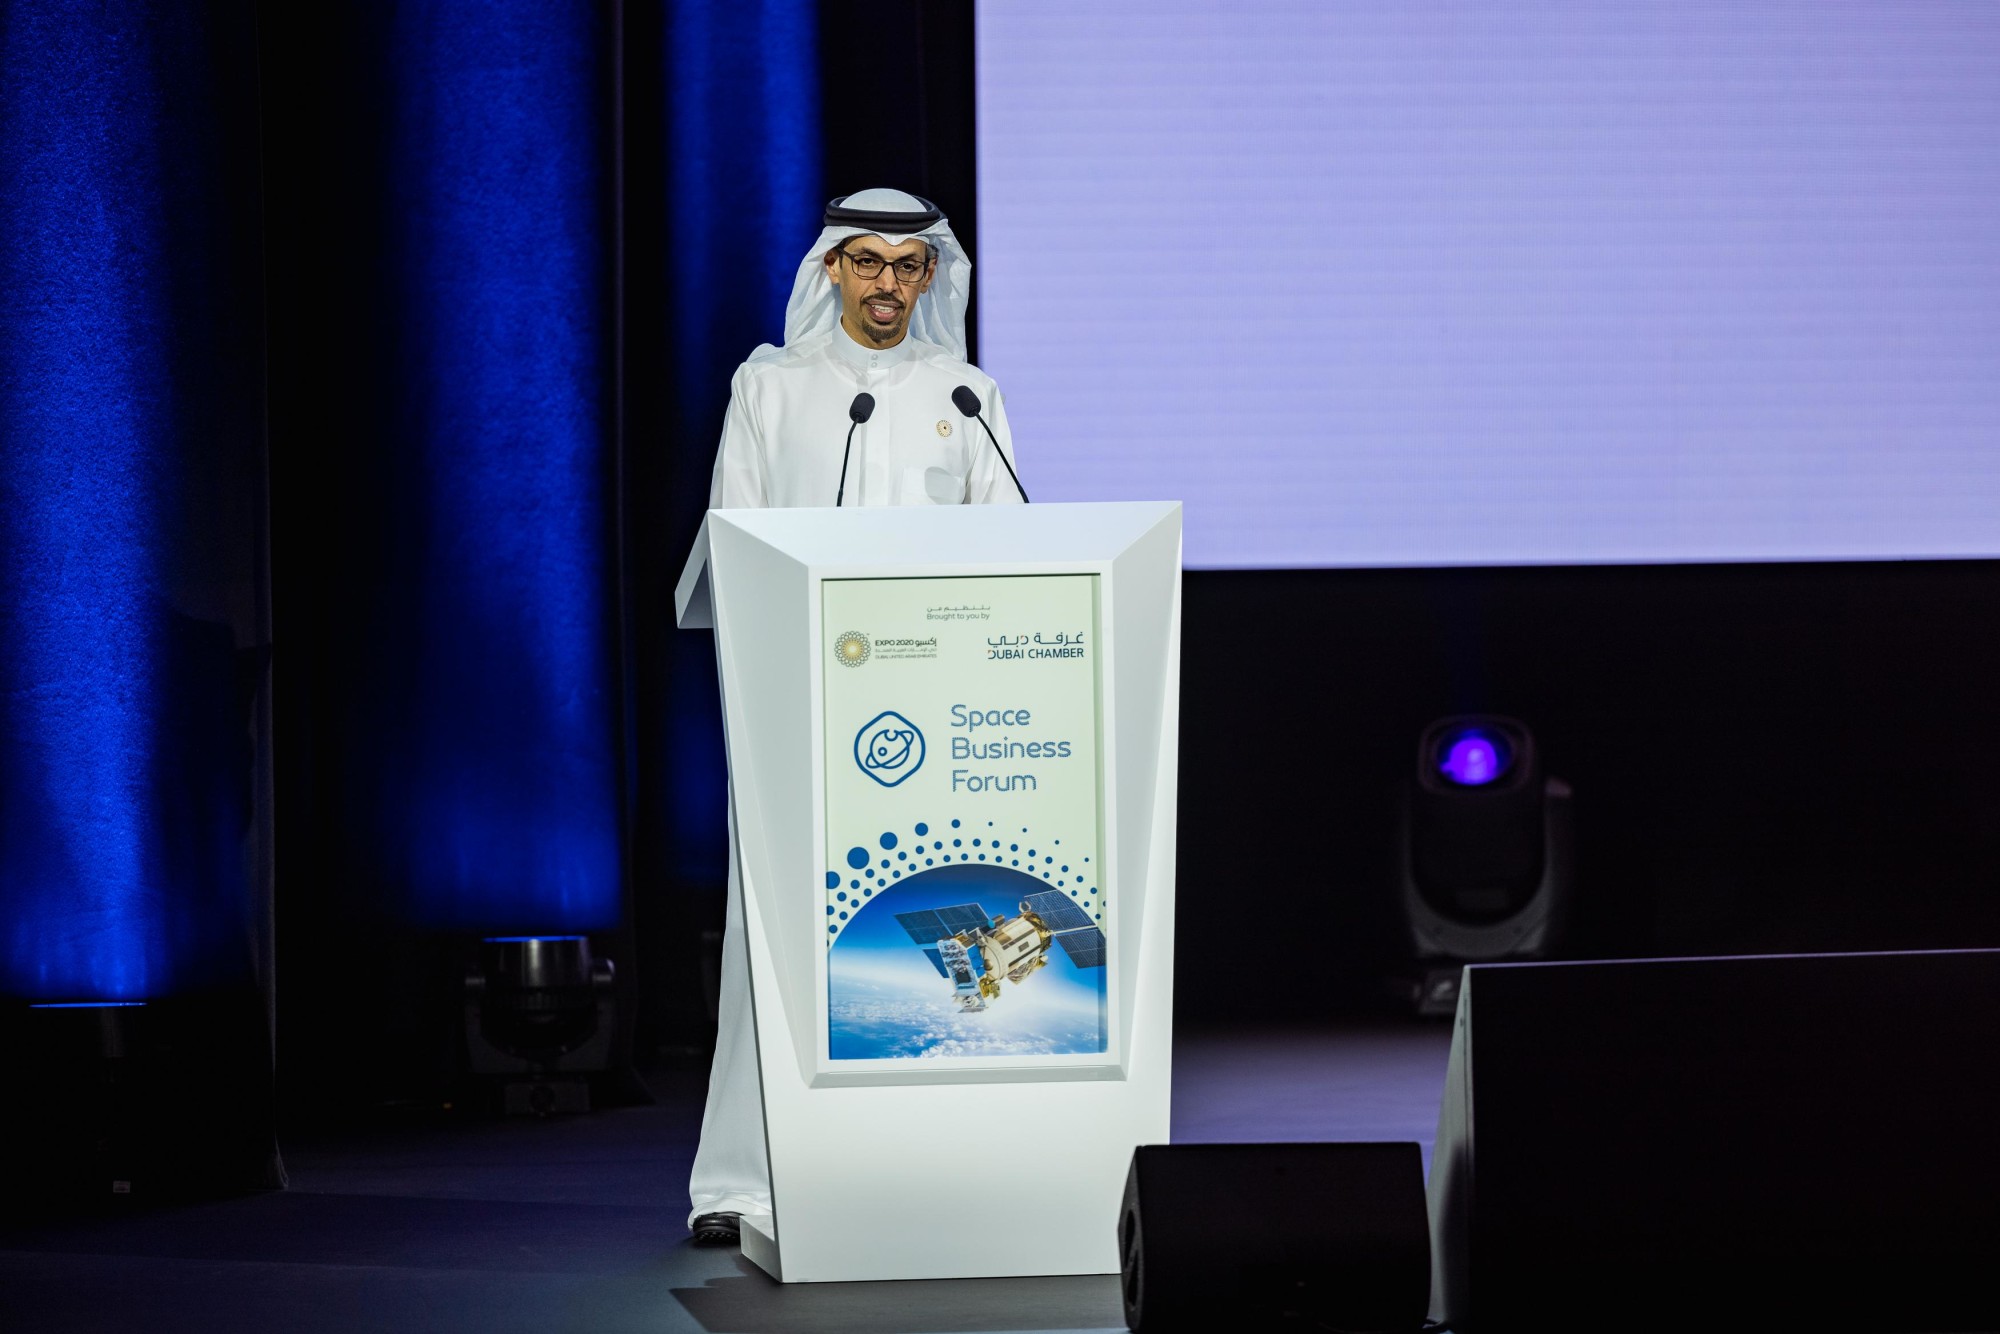 HE Hamad Buamim President amp andCEO Dubai Chamber of Commerce during the Space Business Forum Web Image m5158